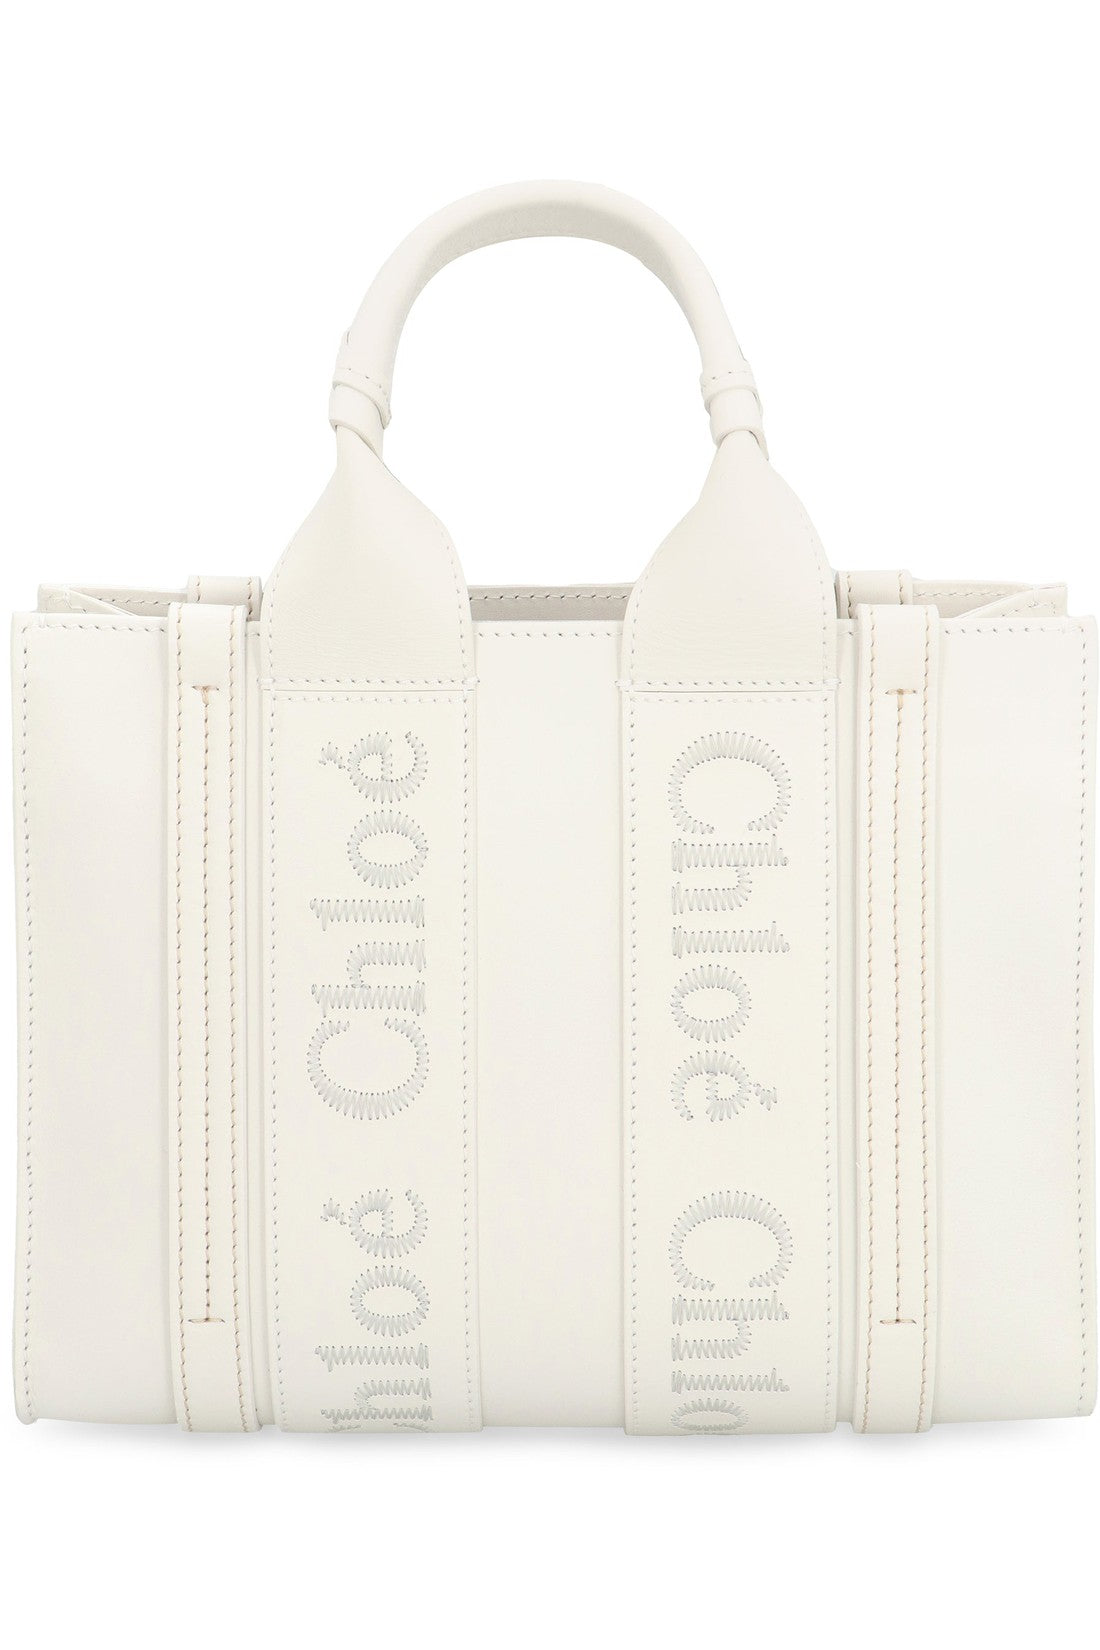 Chloé-OUTLET-SALE-Woody Smooth leather tote bag-ARCHIVIST